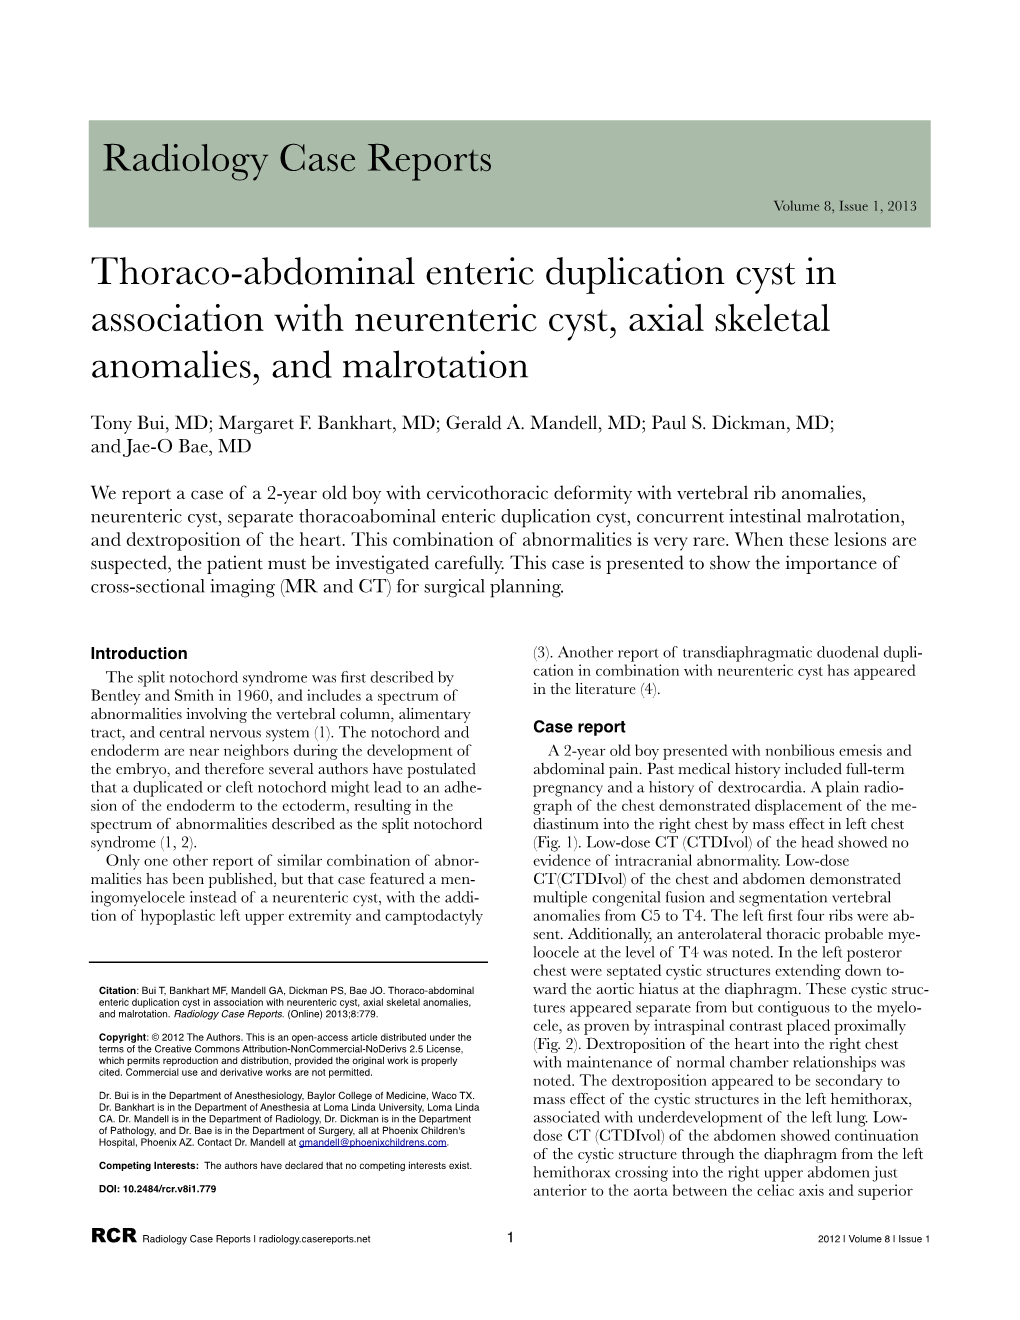 Thoraco-Abdominal Enteric Duplication Cyst in Association with Neurenteric Cyst, Axial Skeletal Anomalies, and Malrotation